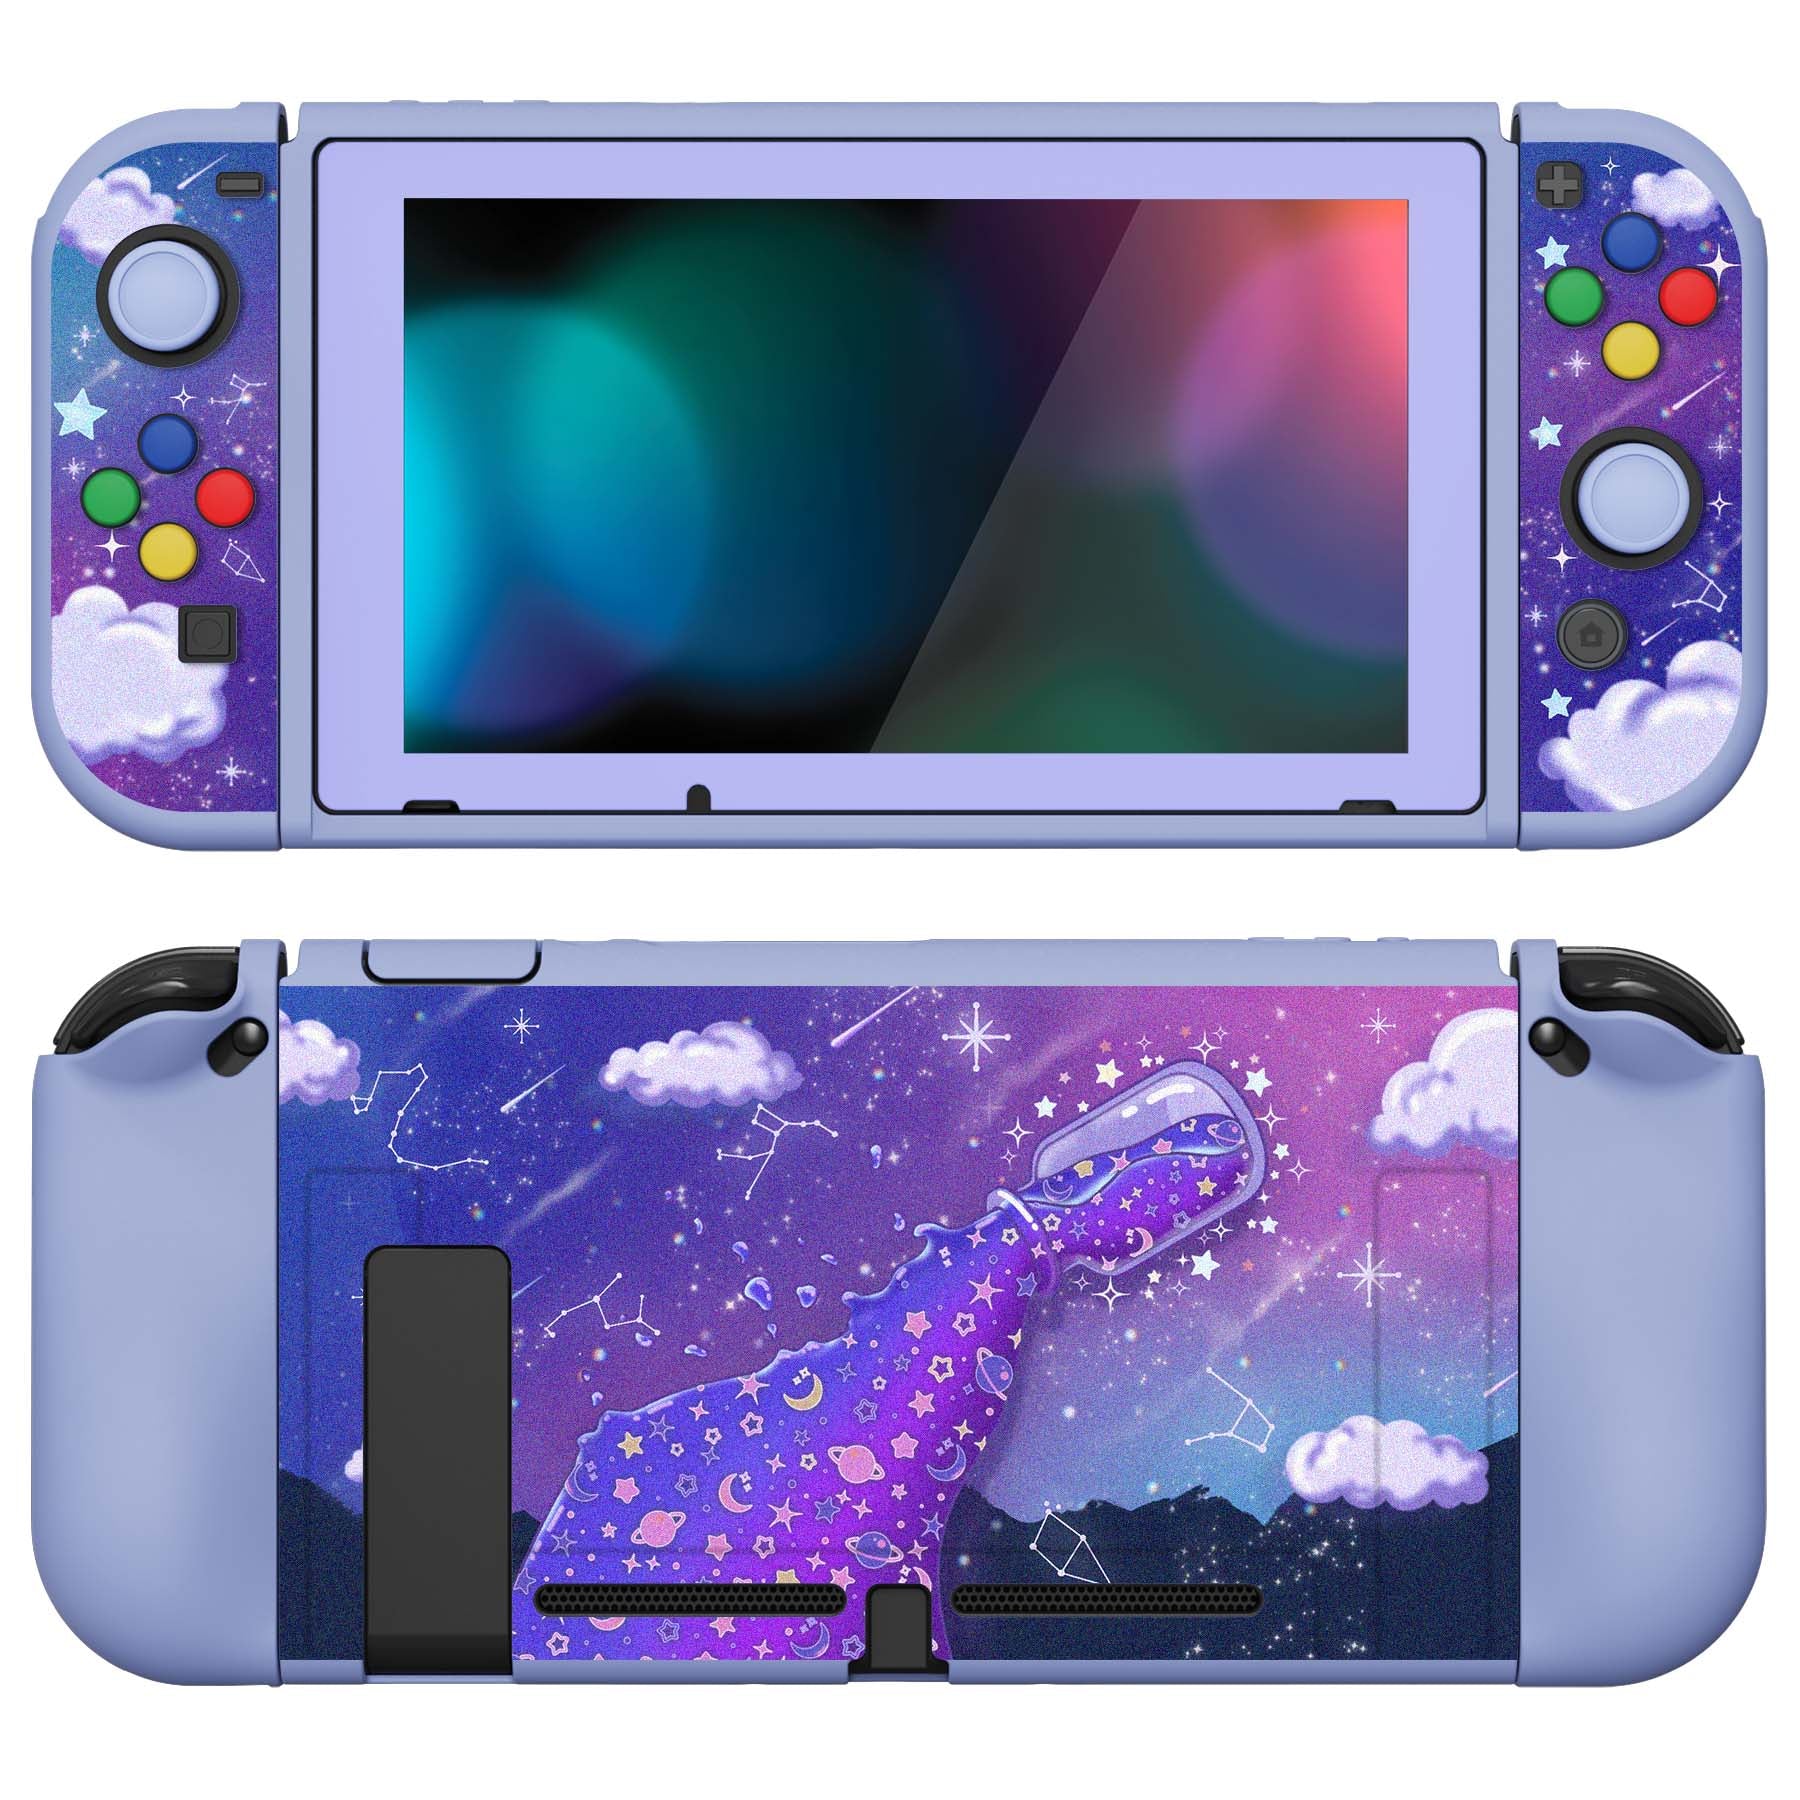 PlayVital ZealProtect Soft Protective Case for Nintendo Switch, Flexible Cover for Switch with Tempered Glass Screen Protector & Thumb Grips & ABXY Direction Button Caps - Pouring Starry - RNSYV6012 playvital